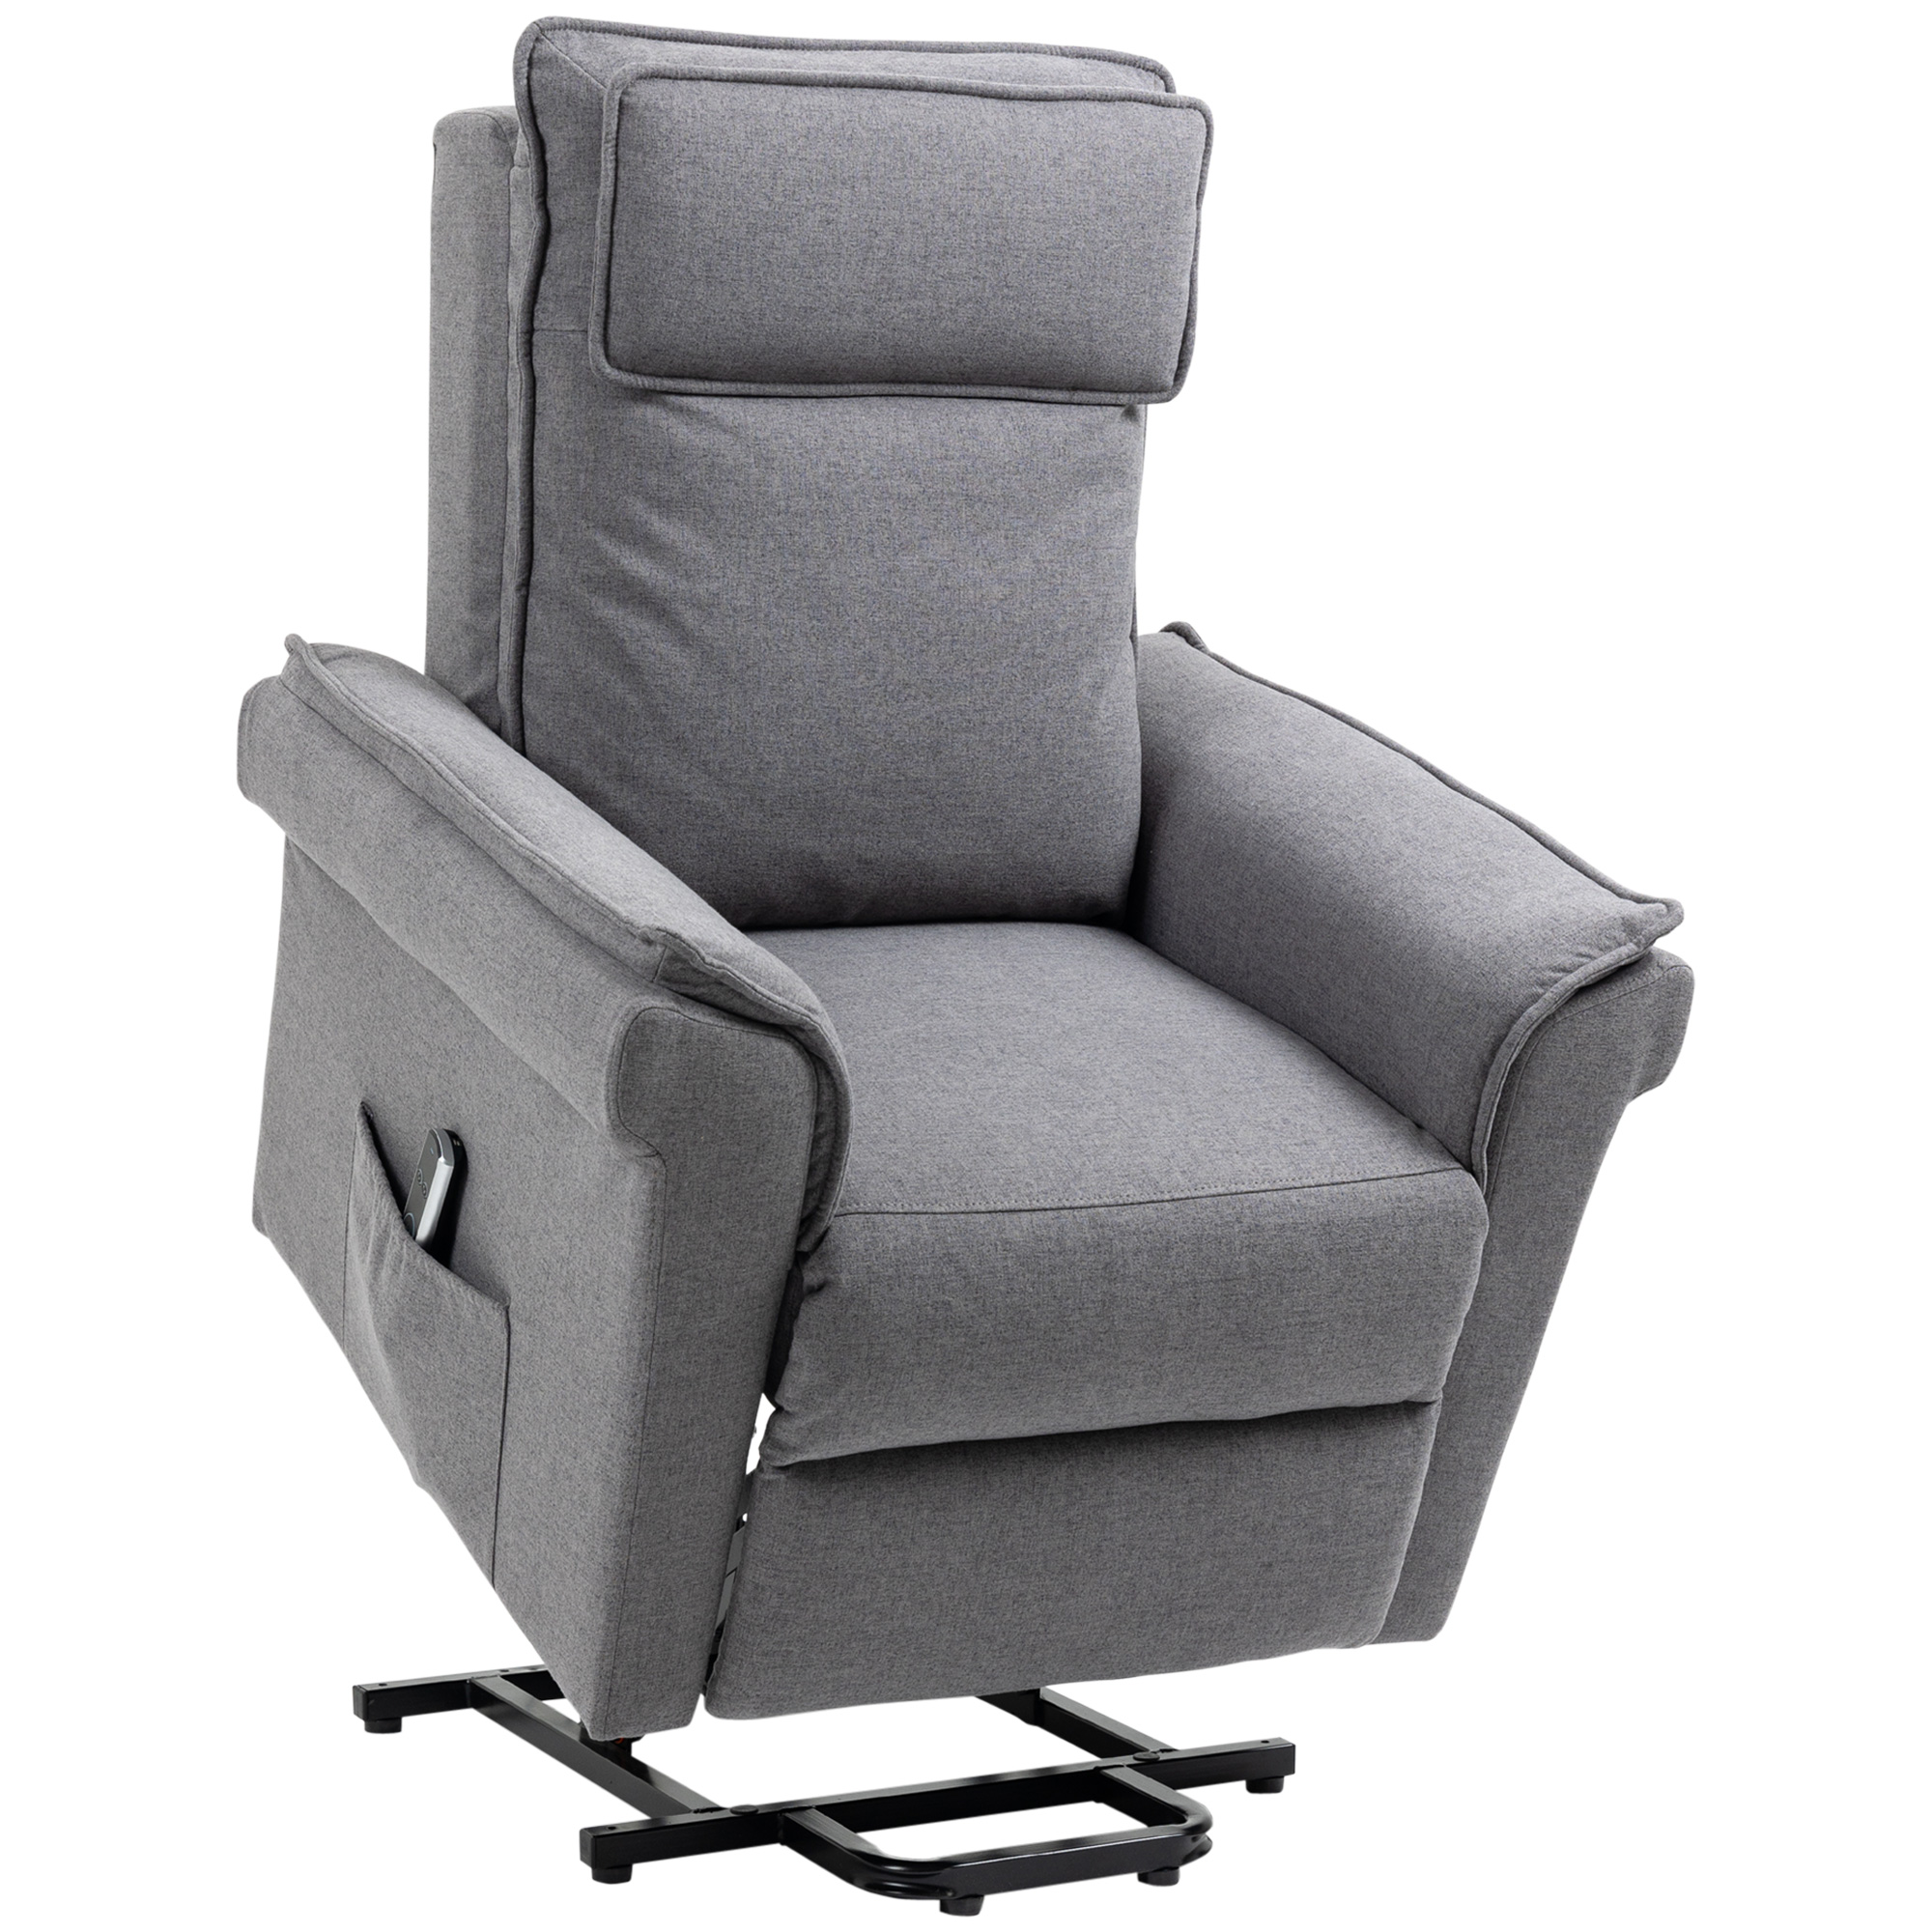 HOMCOM Relaxing Lift Chair με μασάζ και ανάκλιση 150°